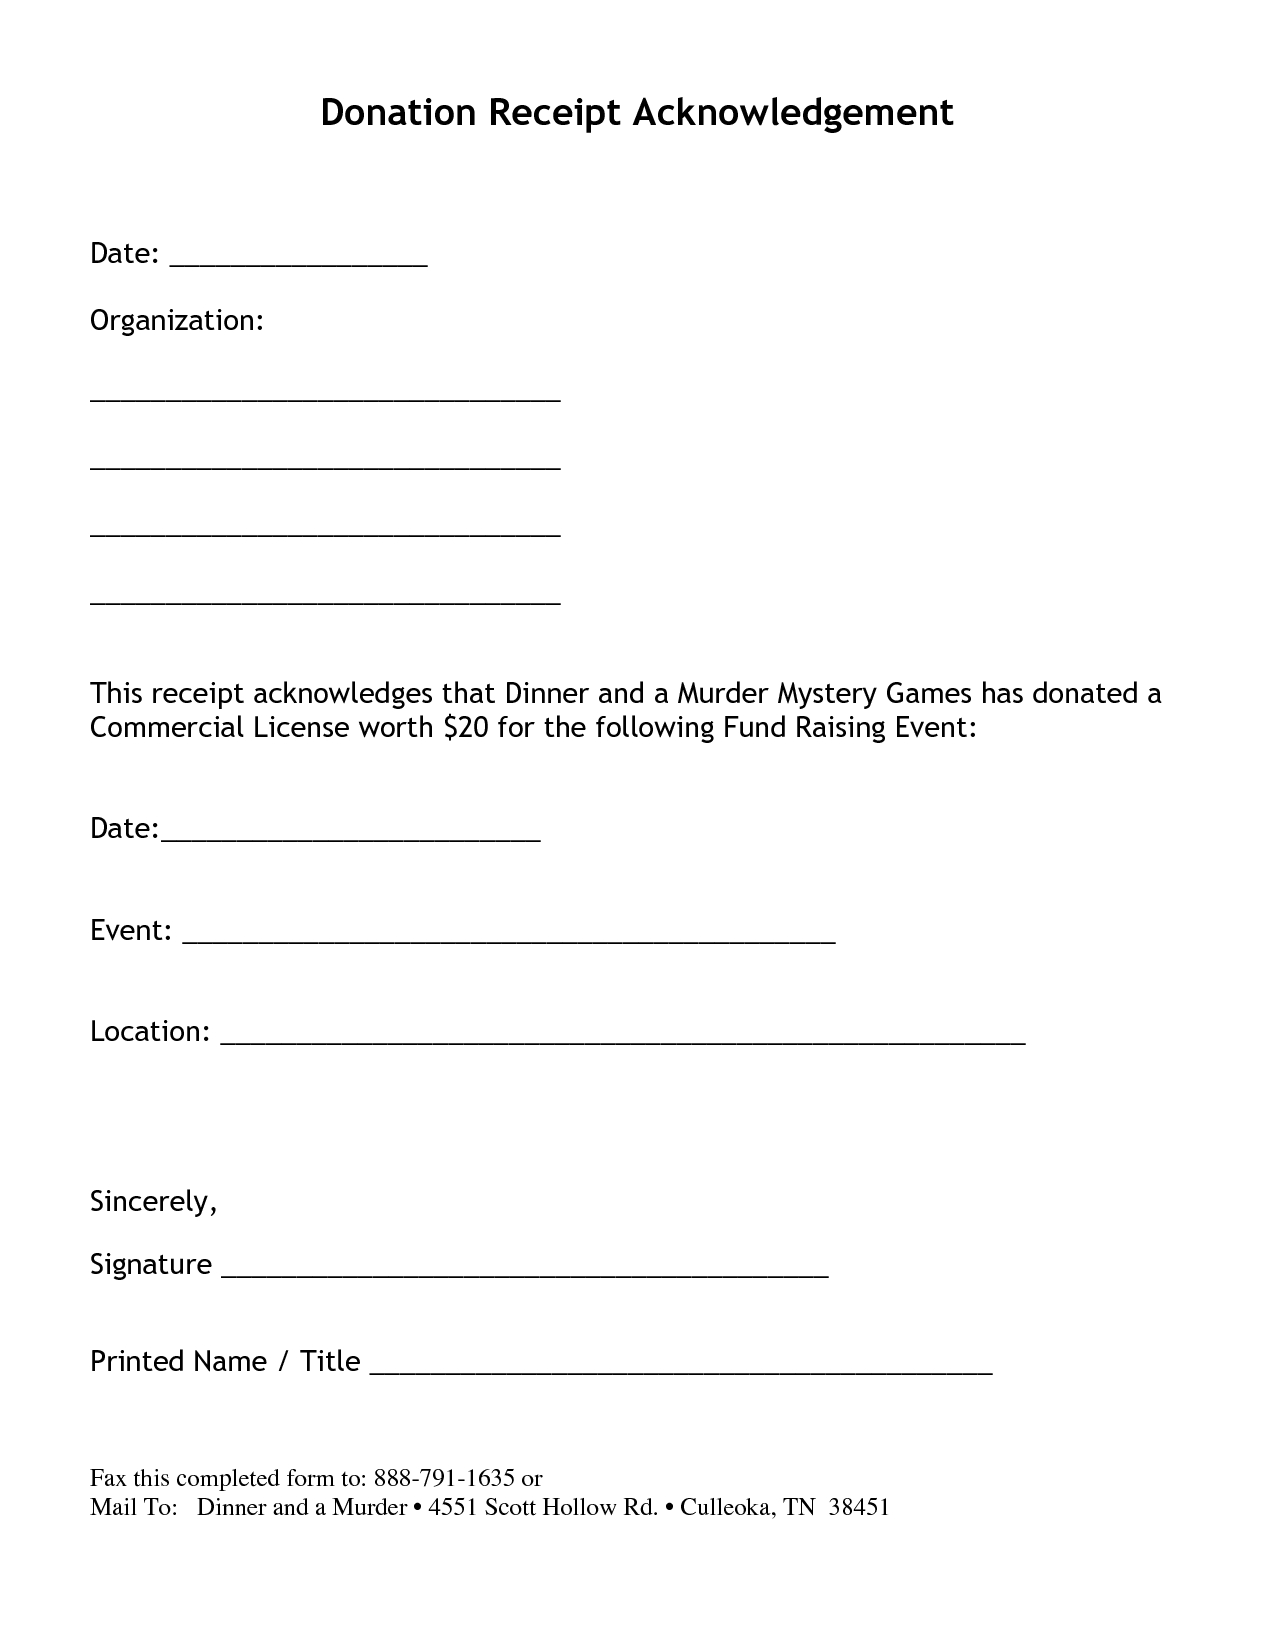 Non Profit Donation Receipt Letter | Things & Stuff With Practical Completion Certificate Template Uk